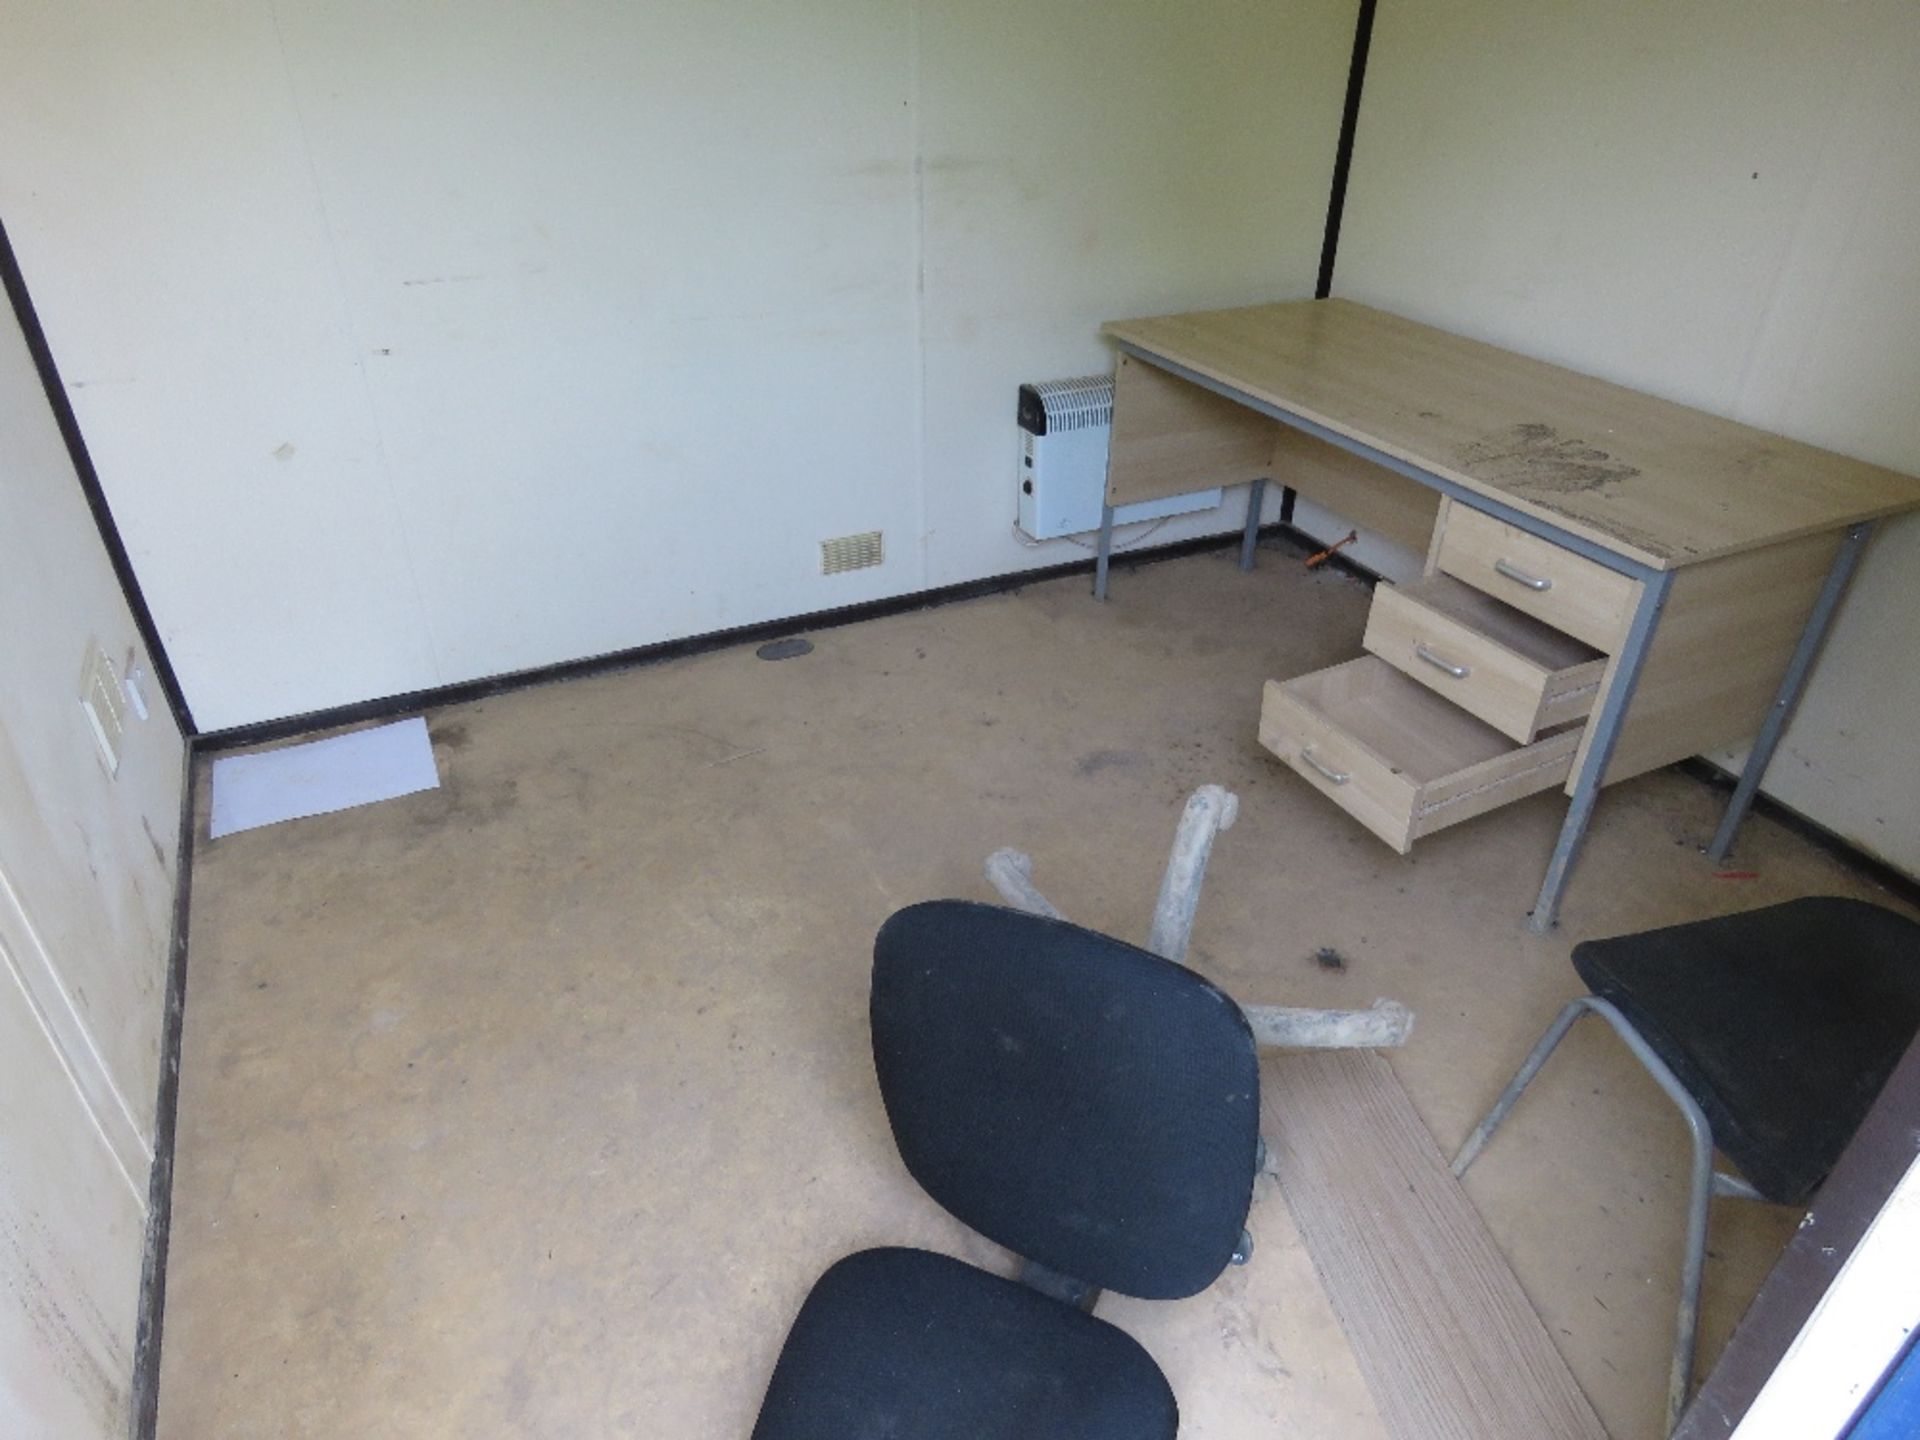 SECURE STEEL SITE OFFICE, WITH STORAGE AREA AT ONE END. 20FT LENGTH X 9FT WIDTH APPROX. NO KEYS, UN - Image 4 of 6